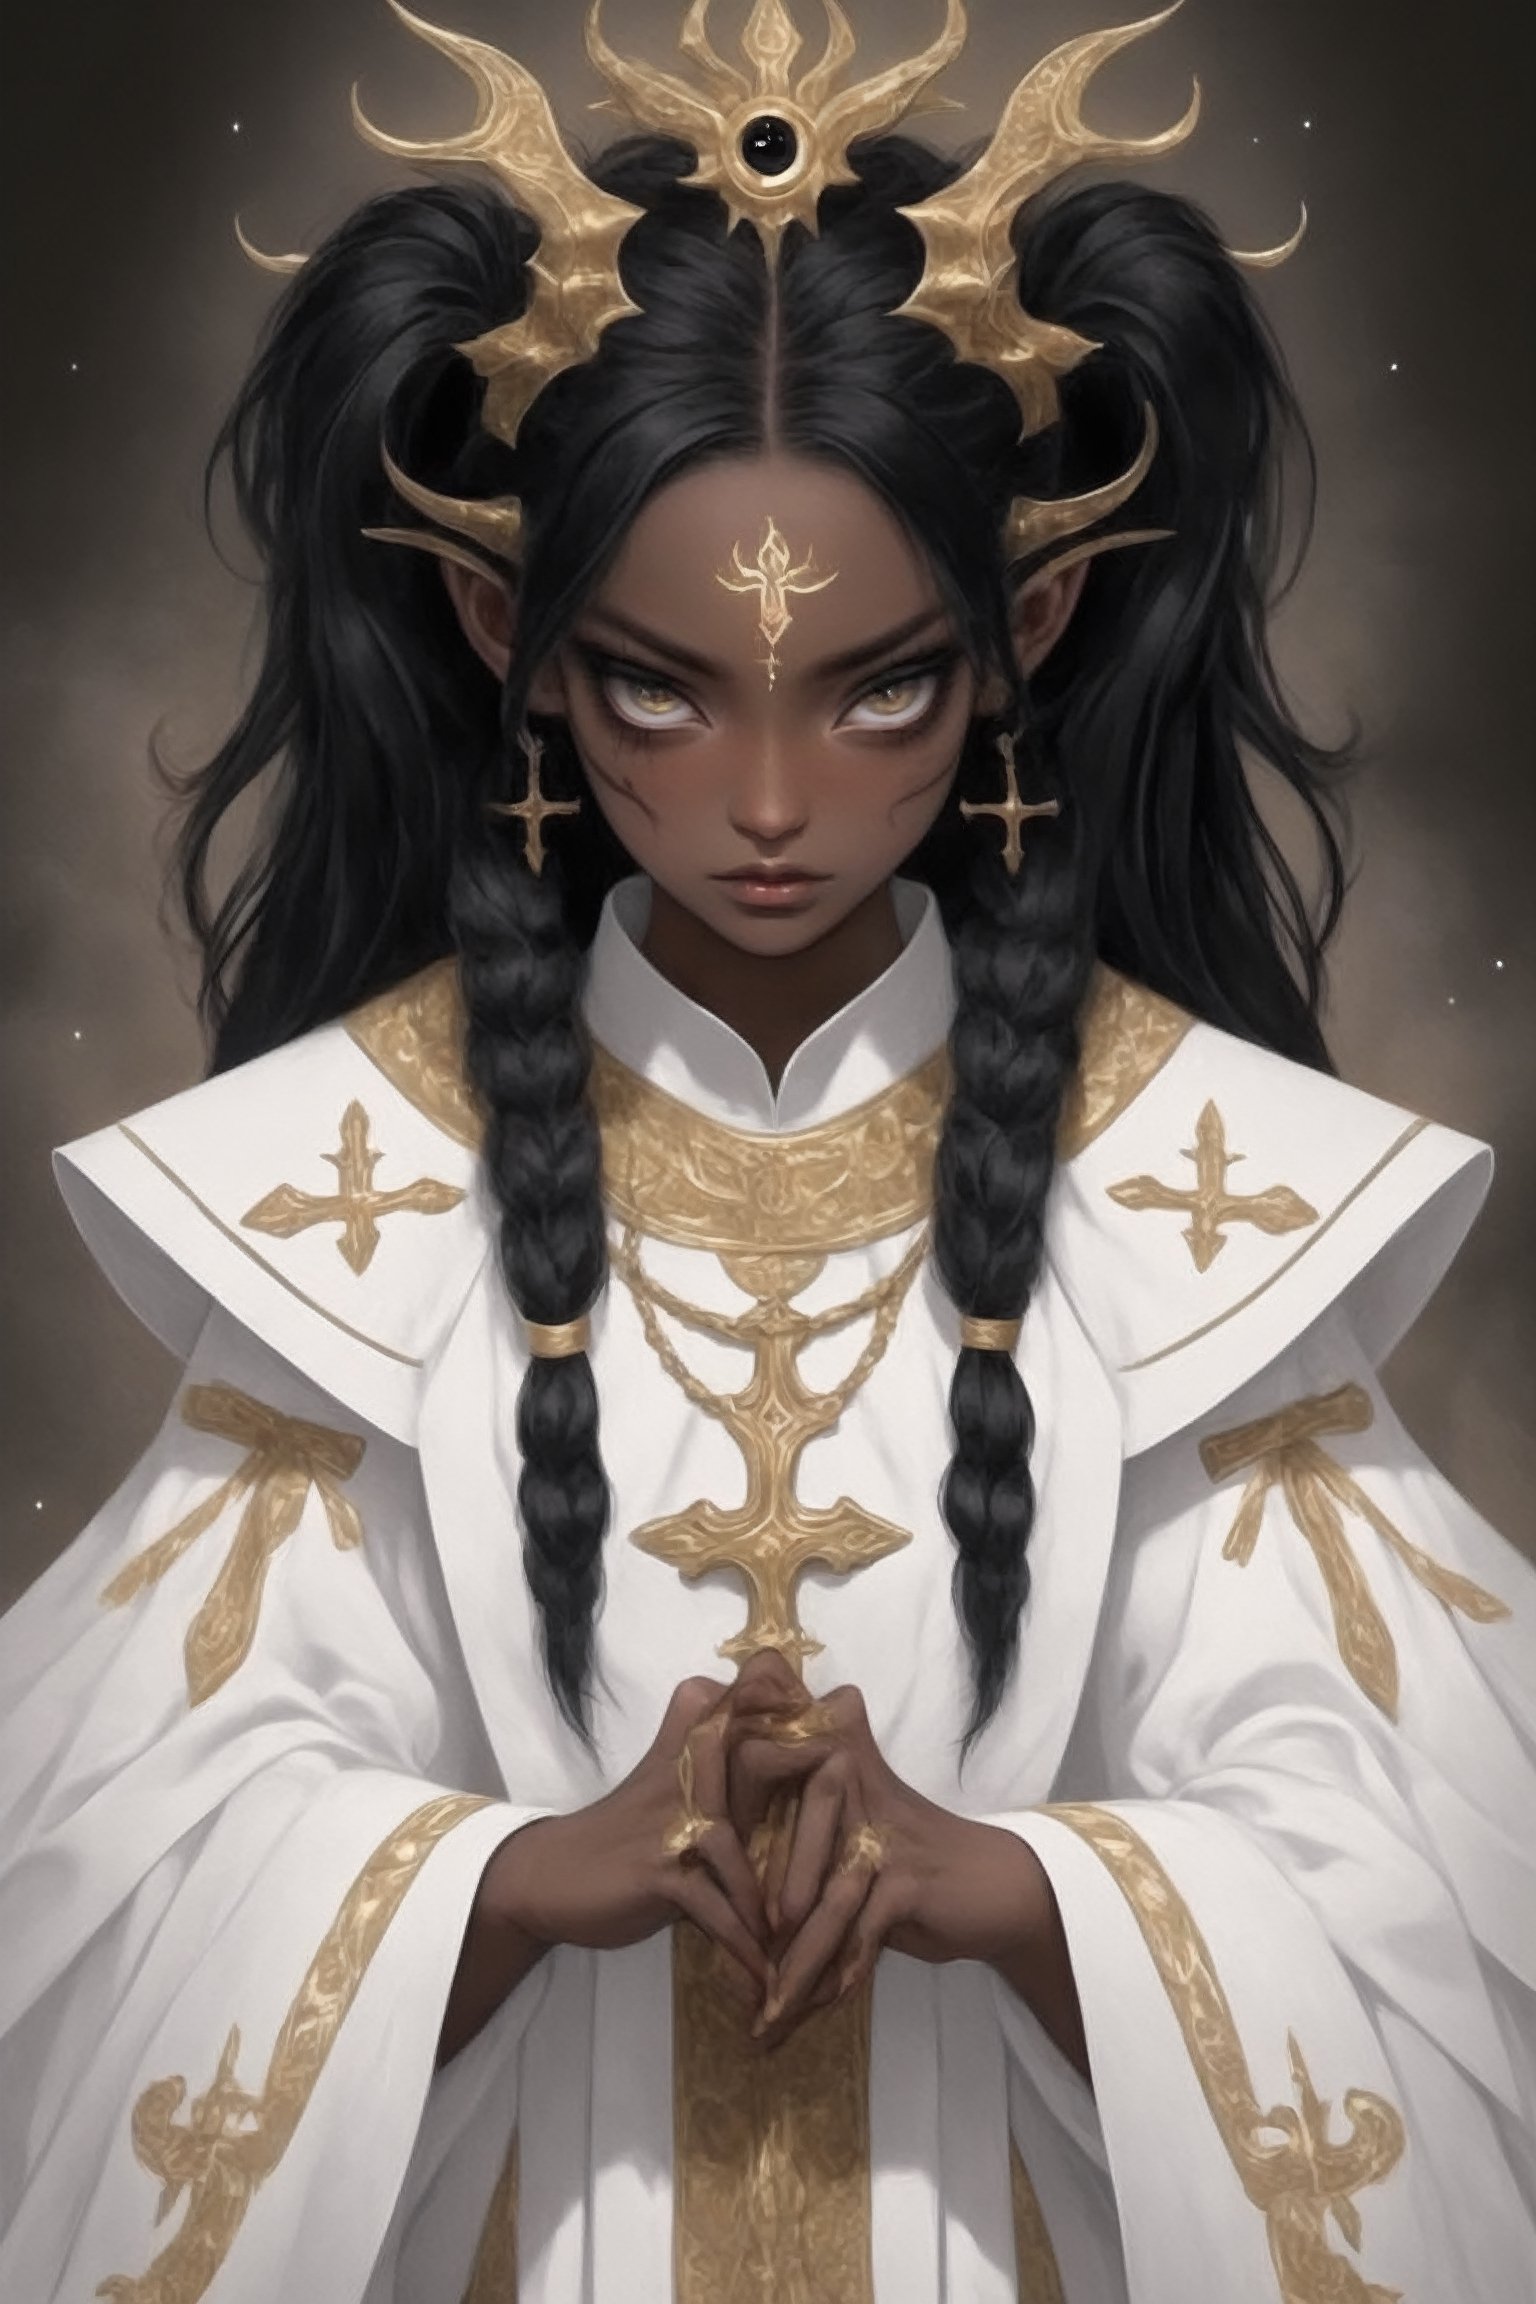 1 girl,supernatural being,(masterful),melanism demon girl,slit pupil eyes,Intricate Iris Details,,ebony skin,pure white pigtails, wearing solemn white and gold ceremonial robes, (majestic bishop's mitre),Envision the pontiff's attire enriched by intricate golden embroidery, sacred symbols,Utra,ellafreya,GothEmoGirl,glitt3r